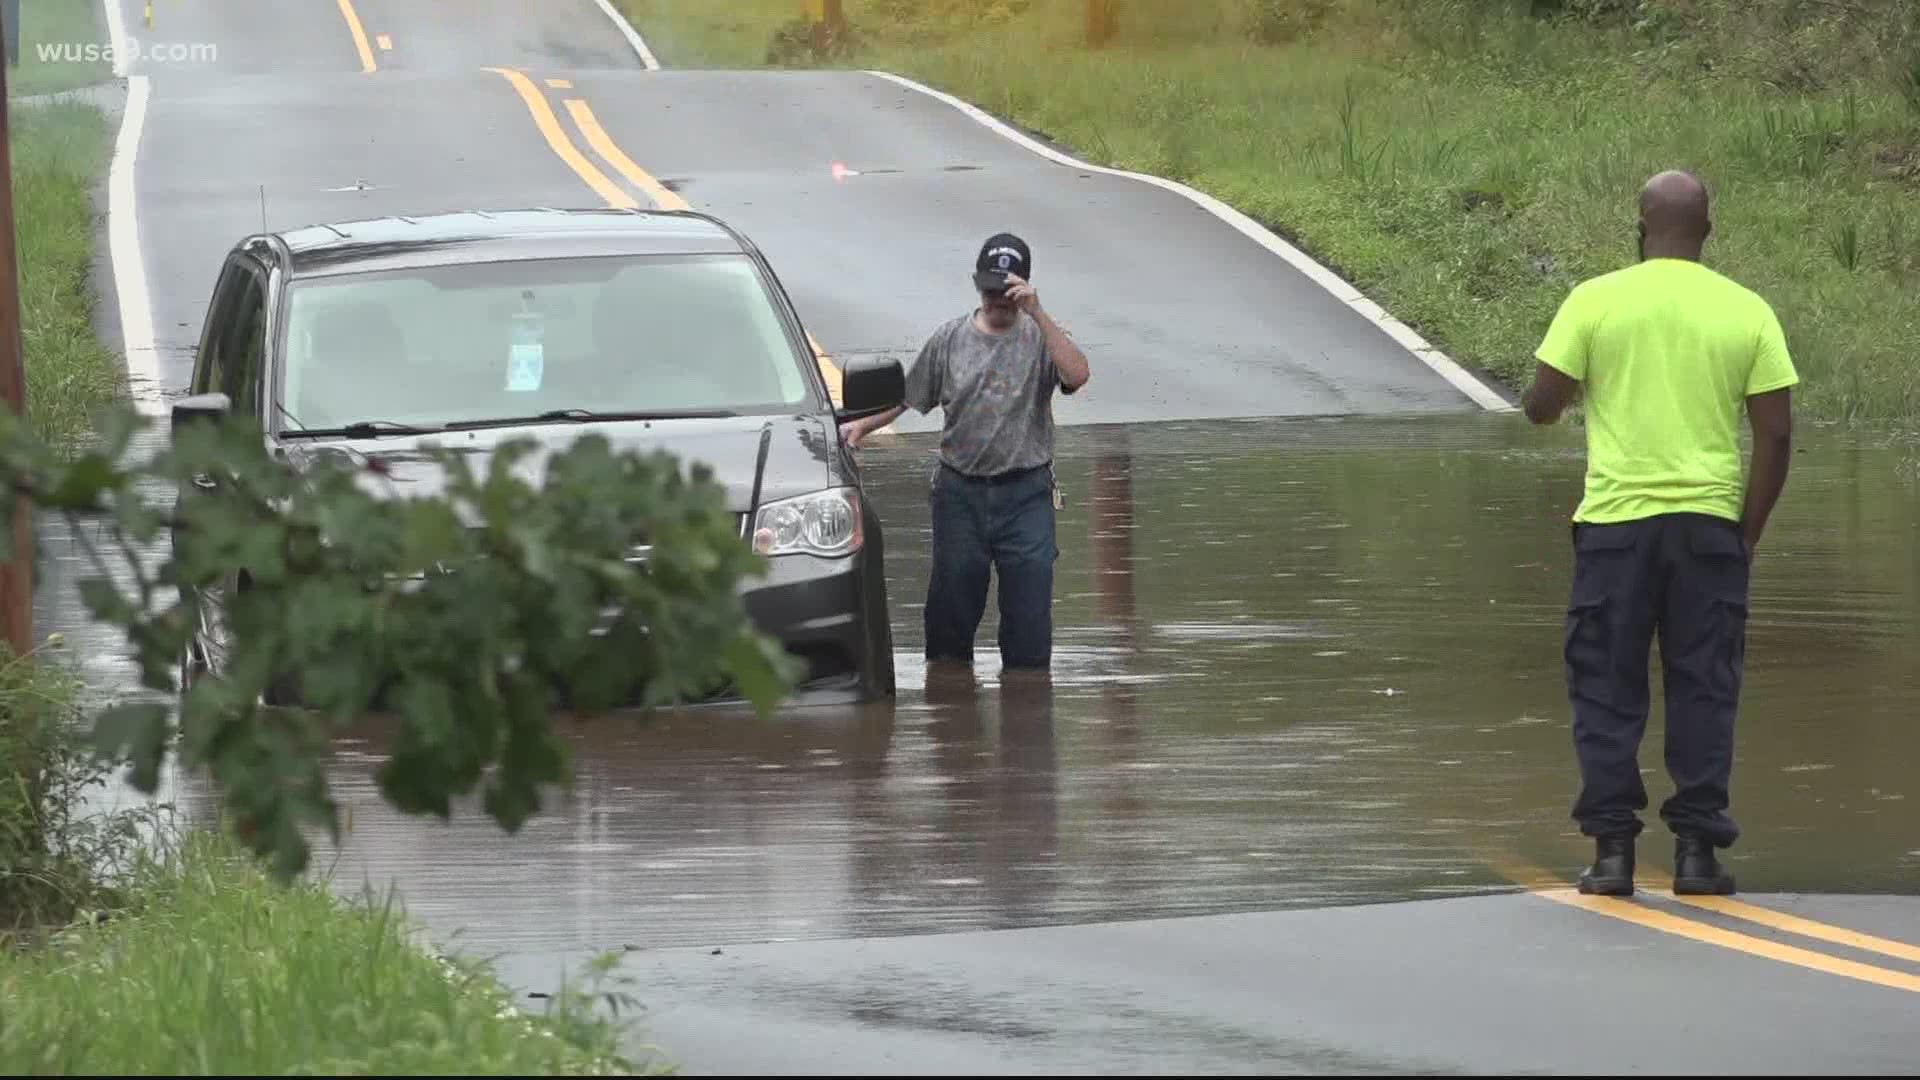 If you see a flooded road, turn around rather than trying to drive through it.